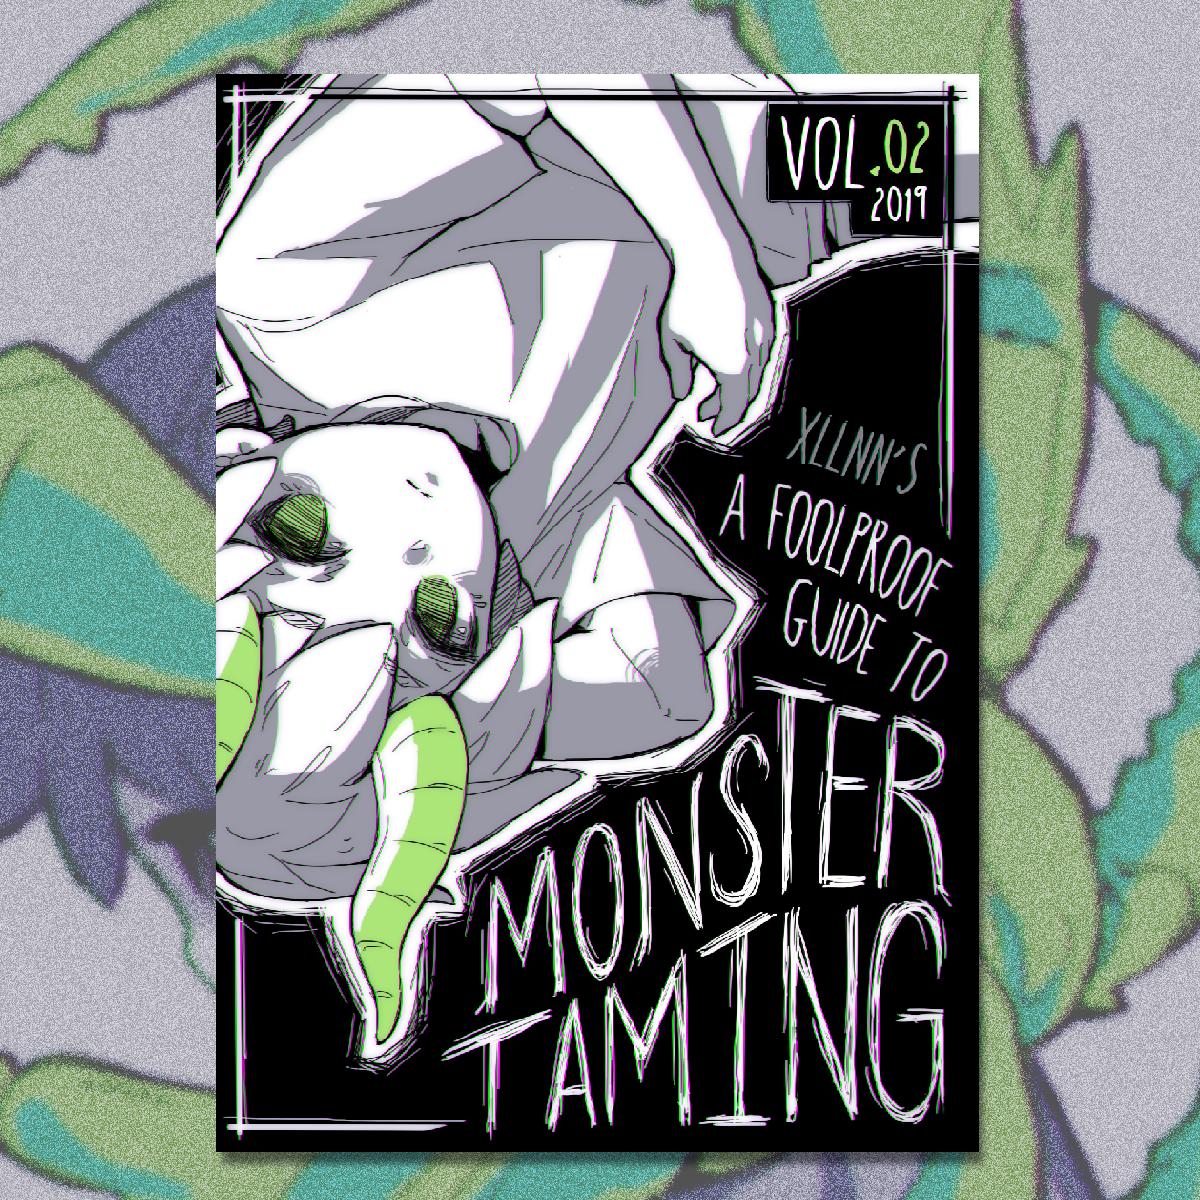 ICYMI I have a zine I self-published a while back called "A Foolproof Guide To Monster Taming" which consists of 16 original poems I wrote & illustrations representing different emotions/feelings/conditions.   It's my way to try and understand and make peace with them